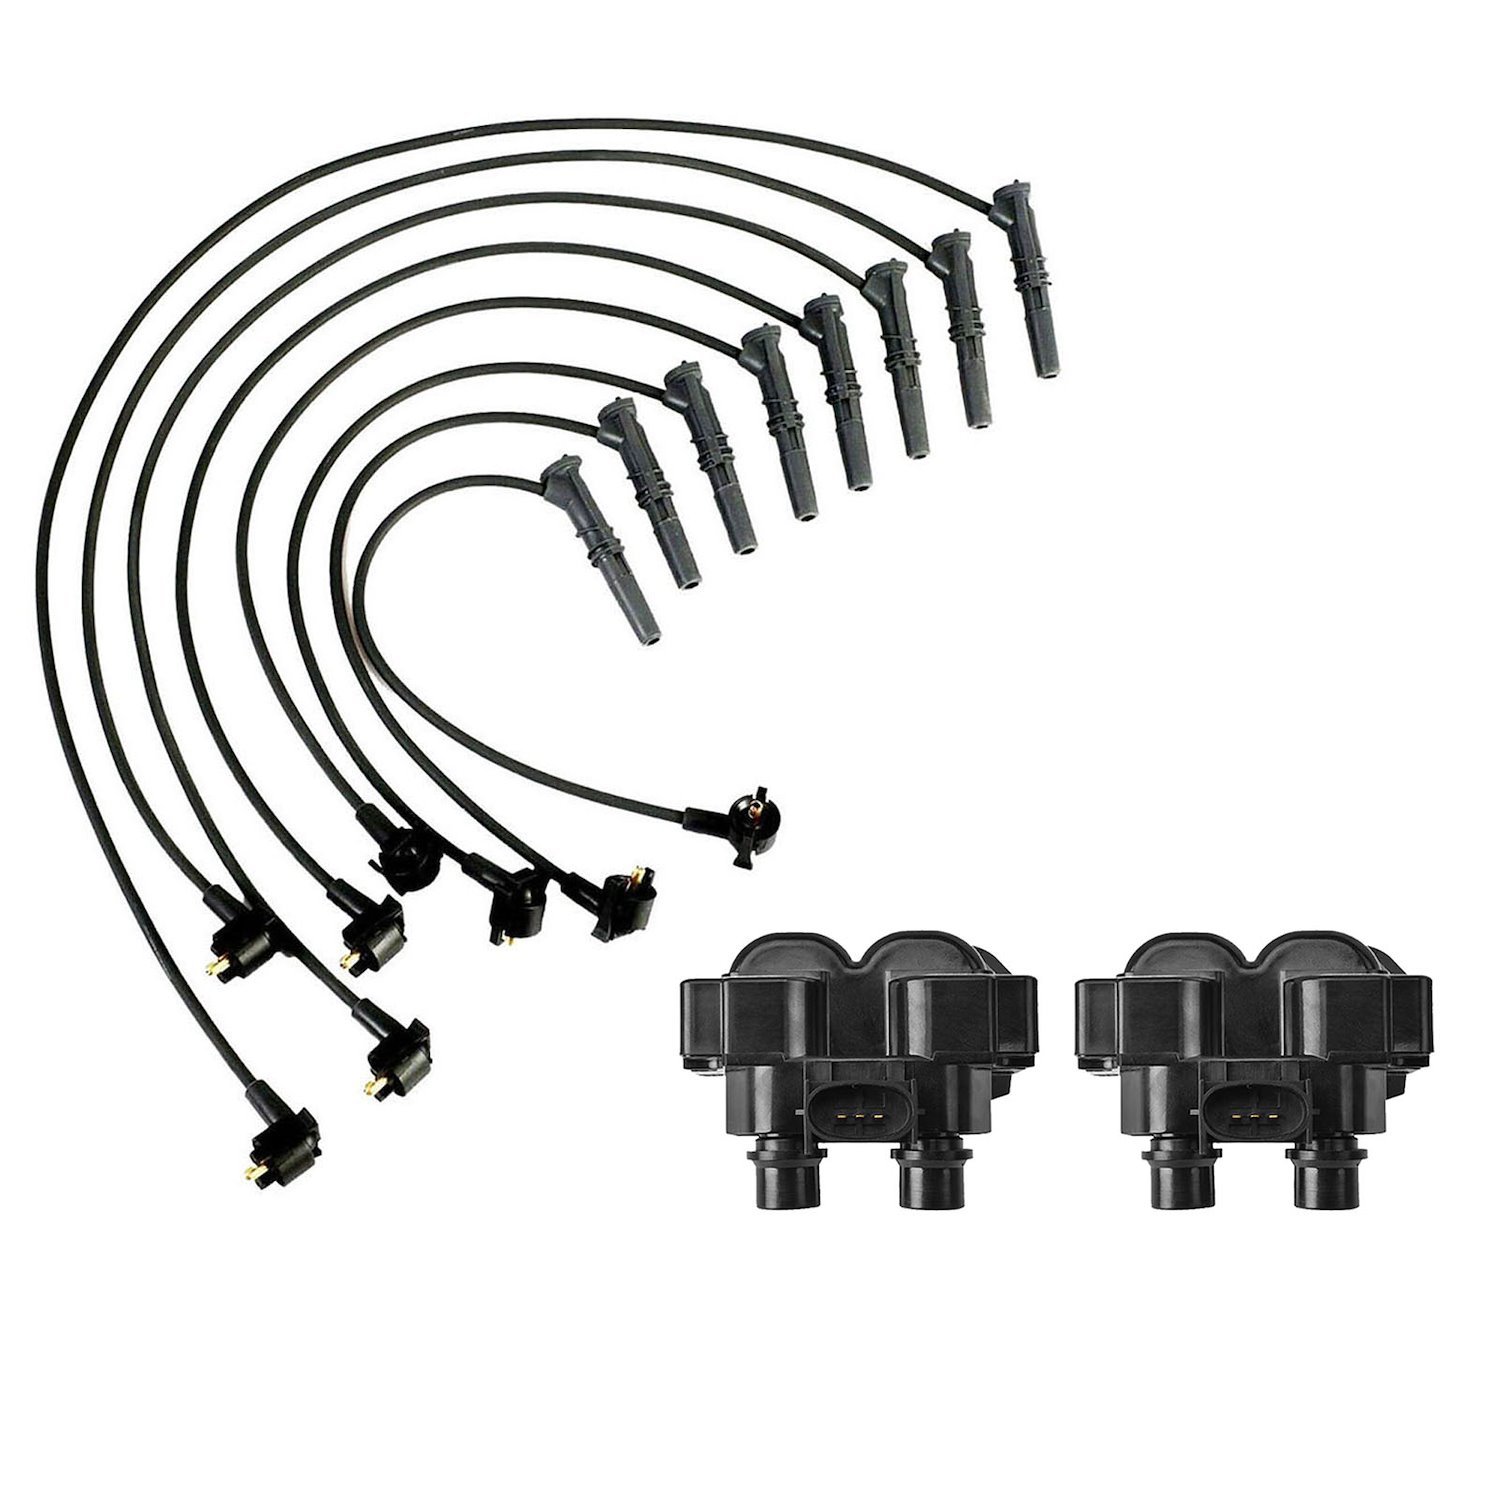 OE Replacement Ignition Coil and Spark Plug Wire Kit, Ford F-150/F-250, Lincoln Mercury